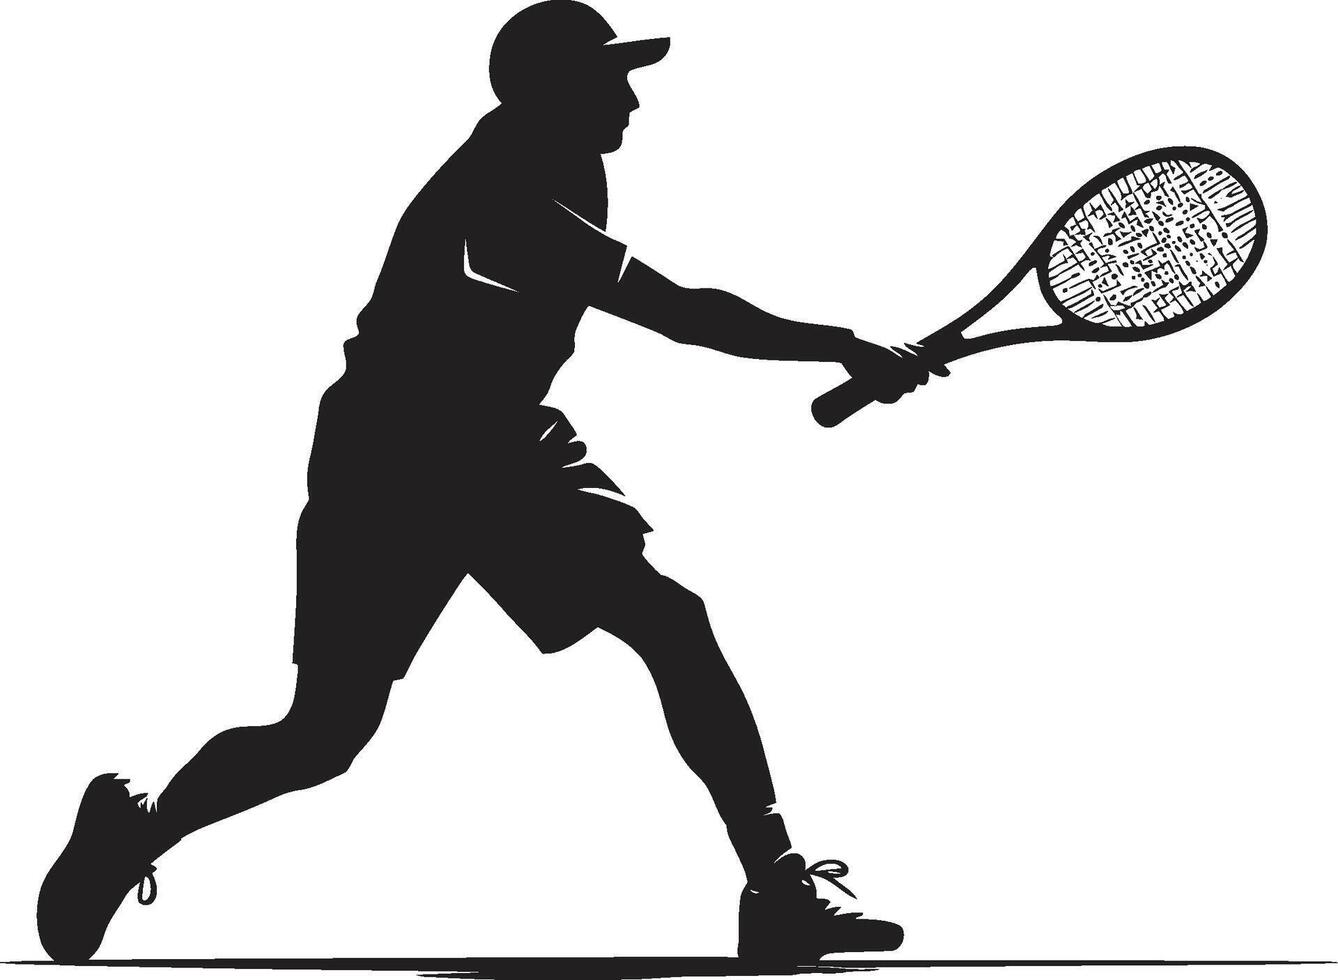 Ace Attacker Badge Tennis Player Vector Logo for Dominant Serve Precision Performer Crest Male Tennis Player Icon in Dynamic Pose